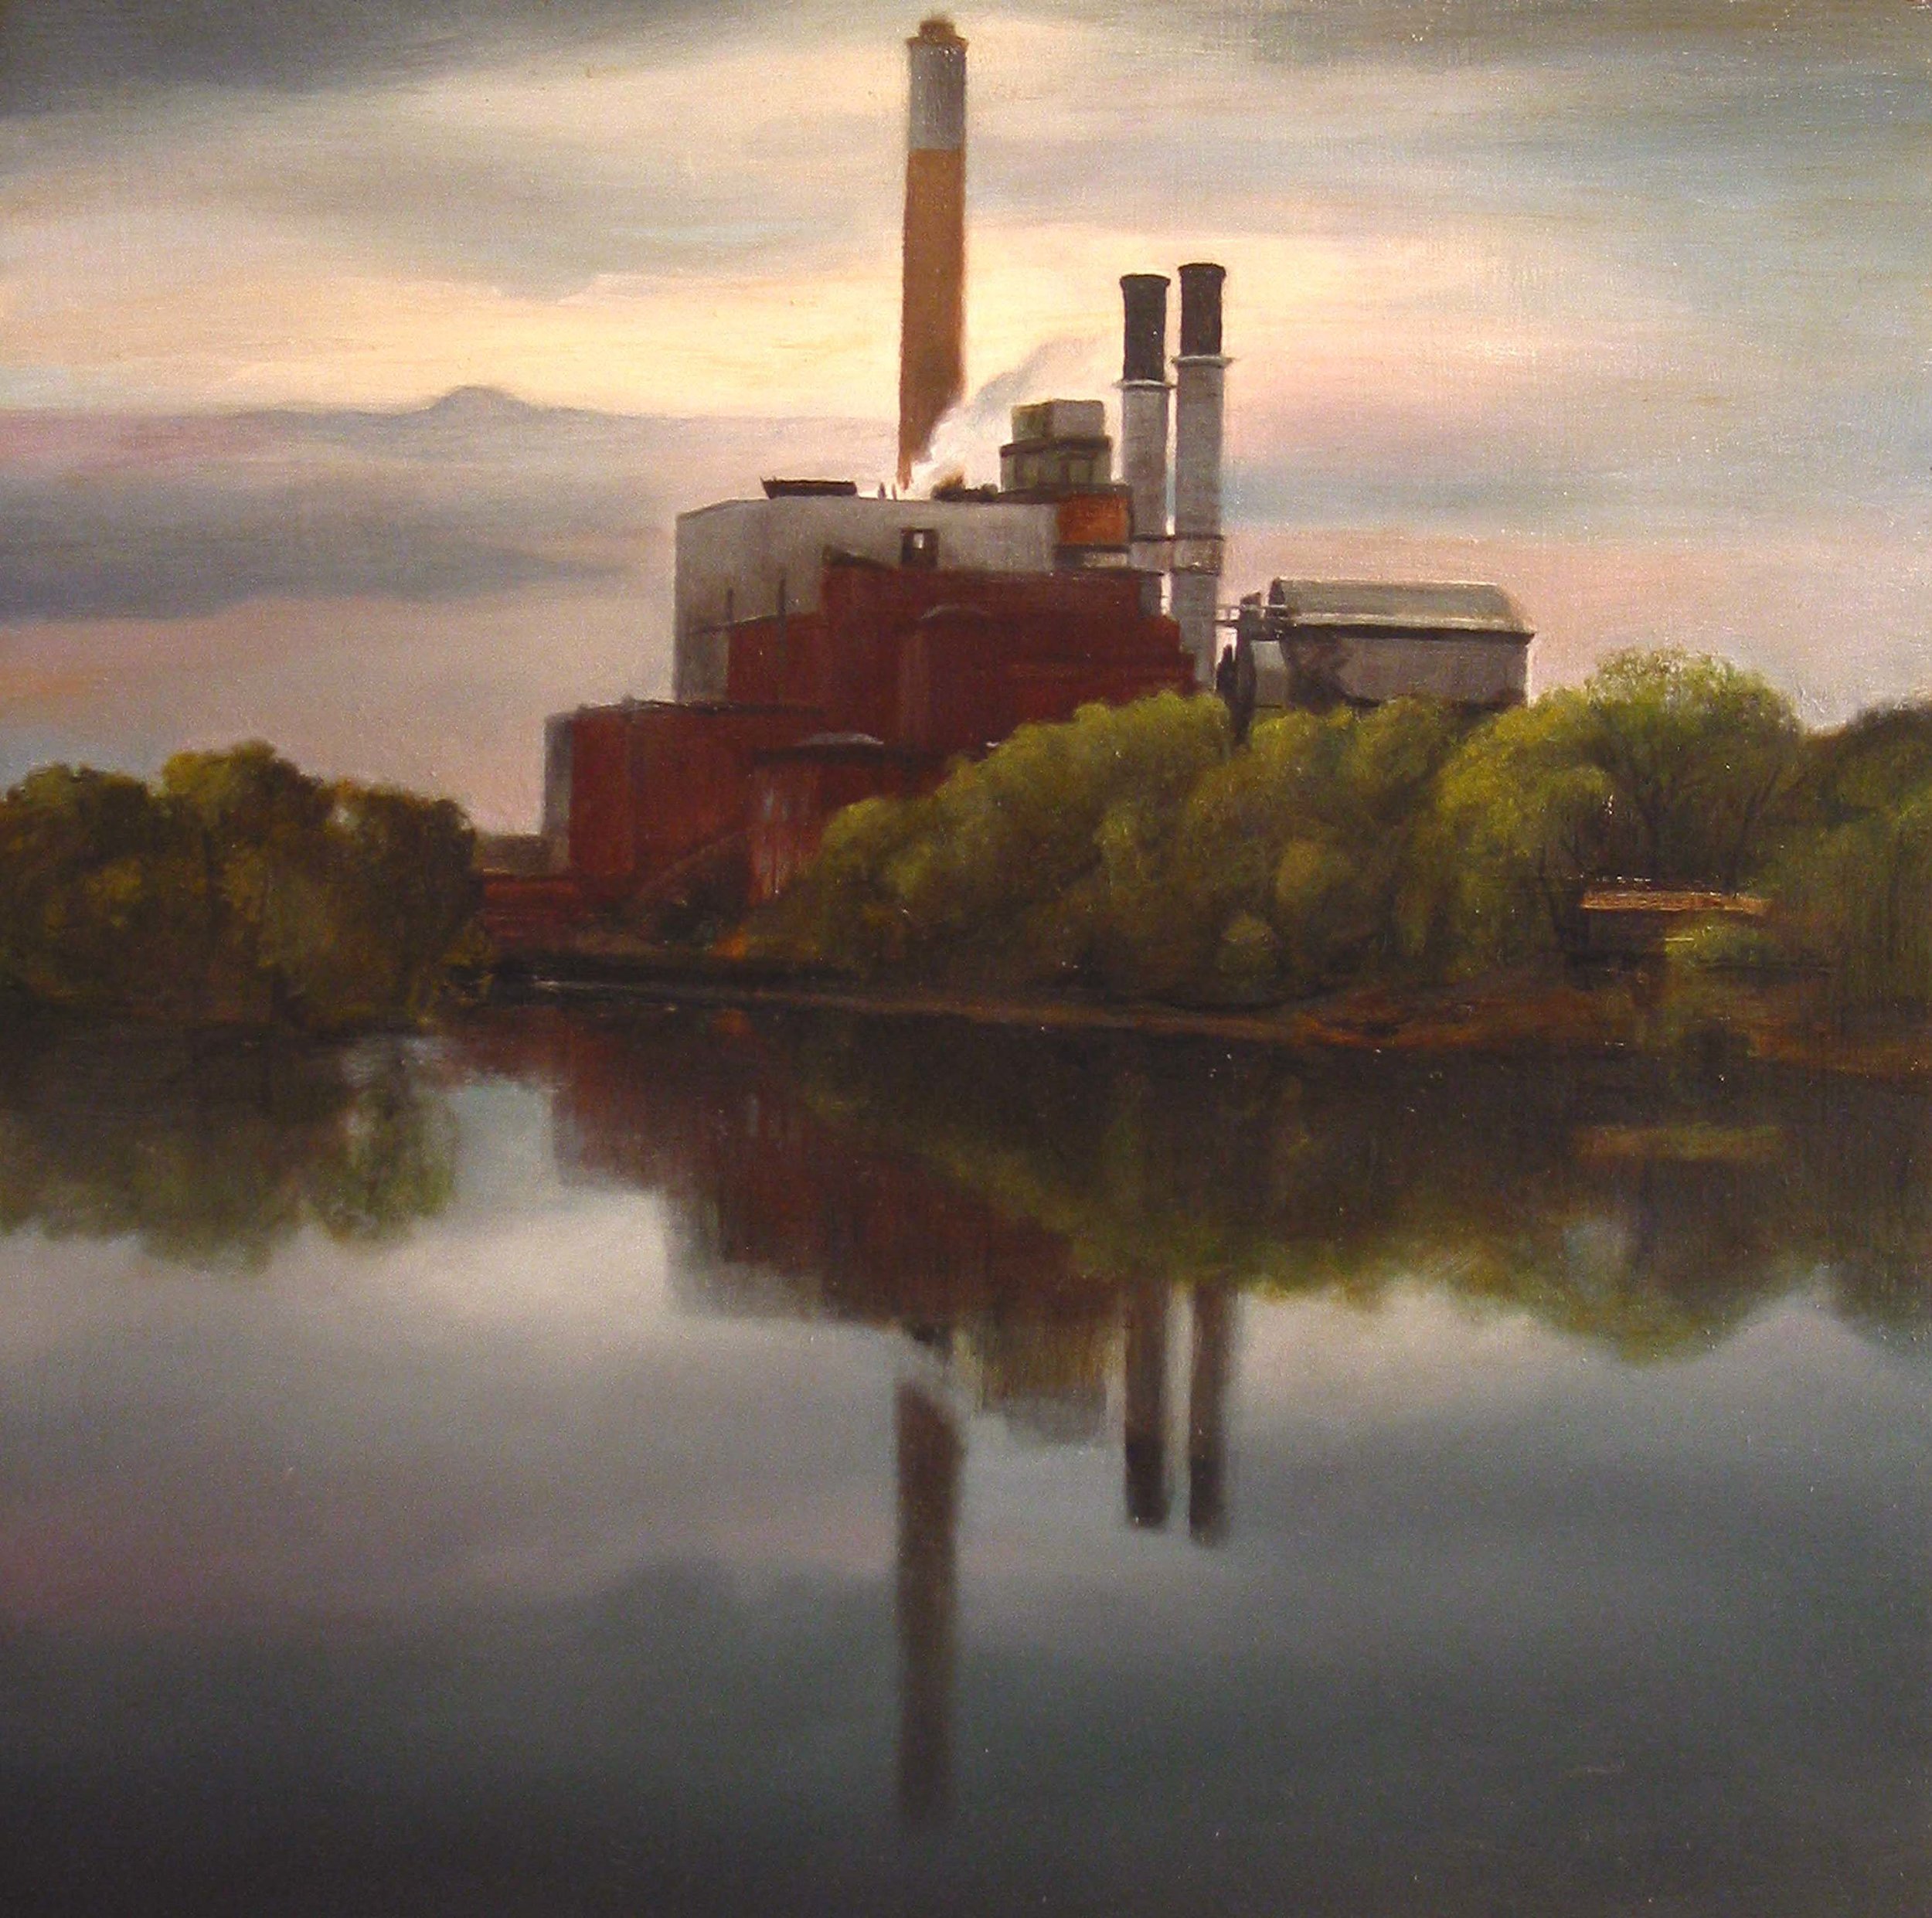   Mississippi River View     Northeast Minneapolis   2006  Oil on panel  9 x 9 inches    